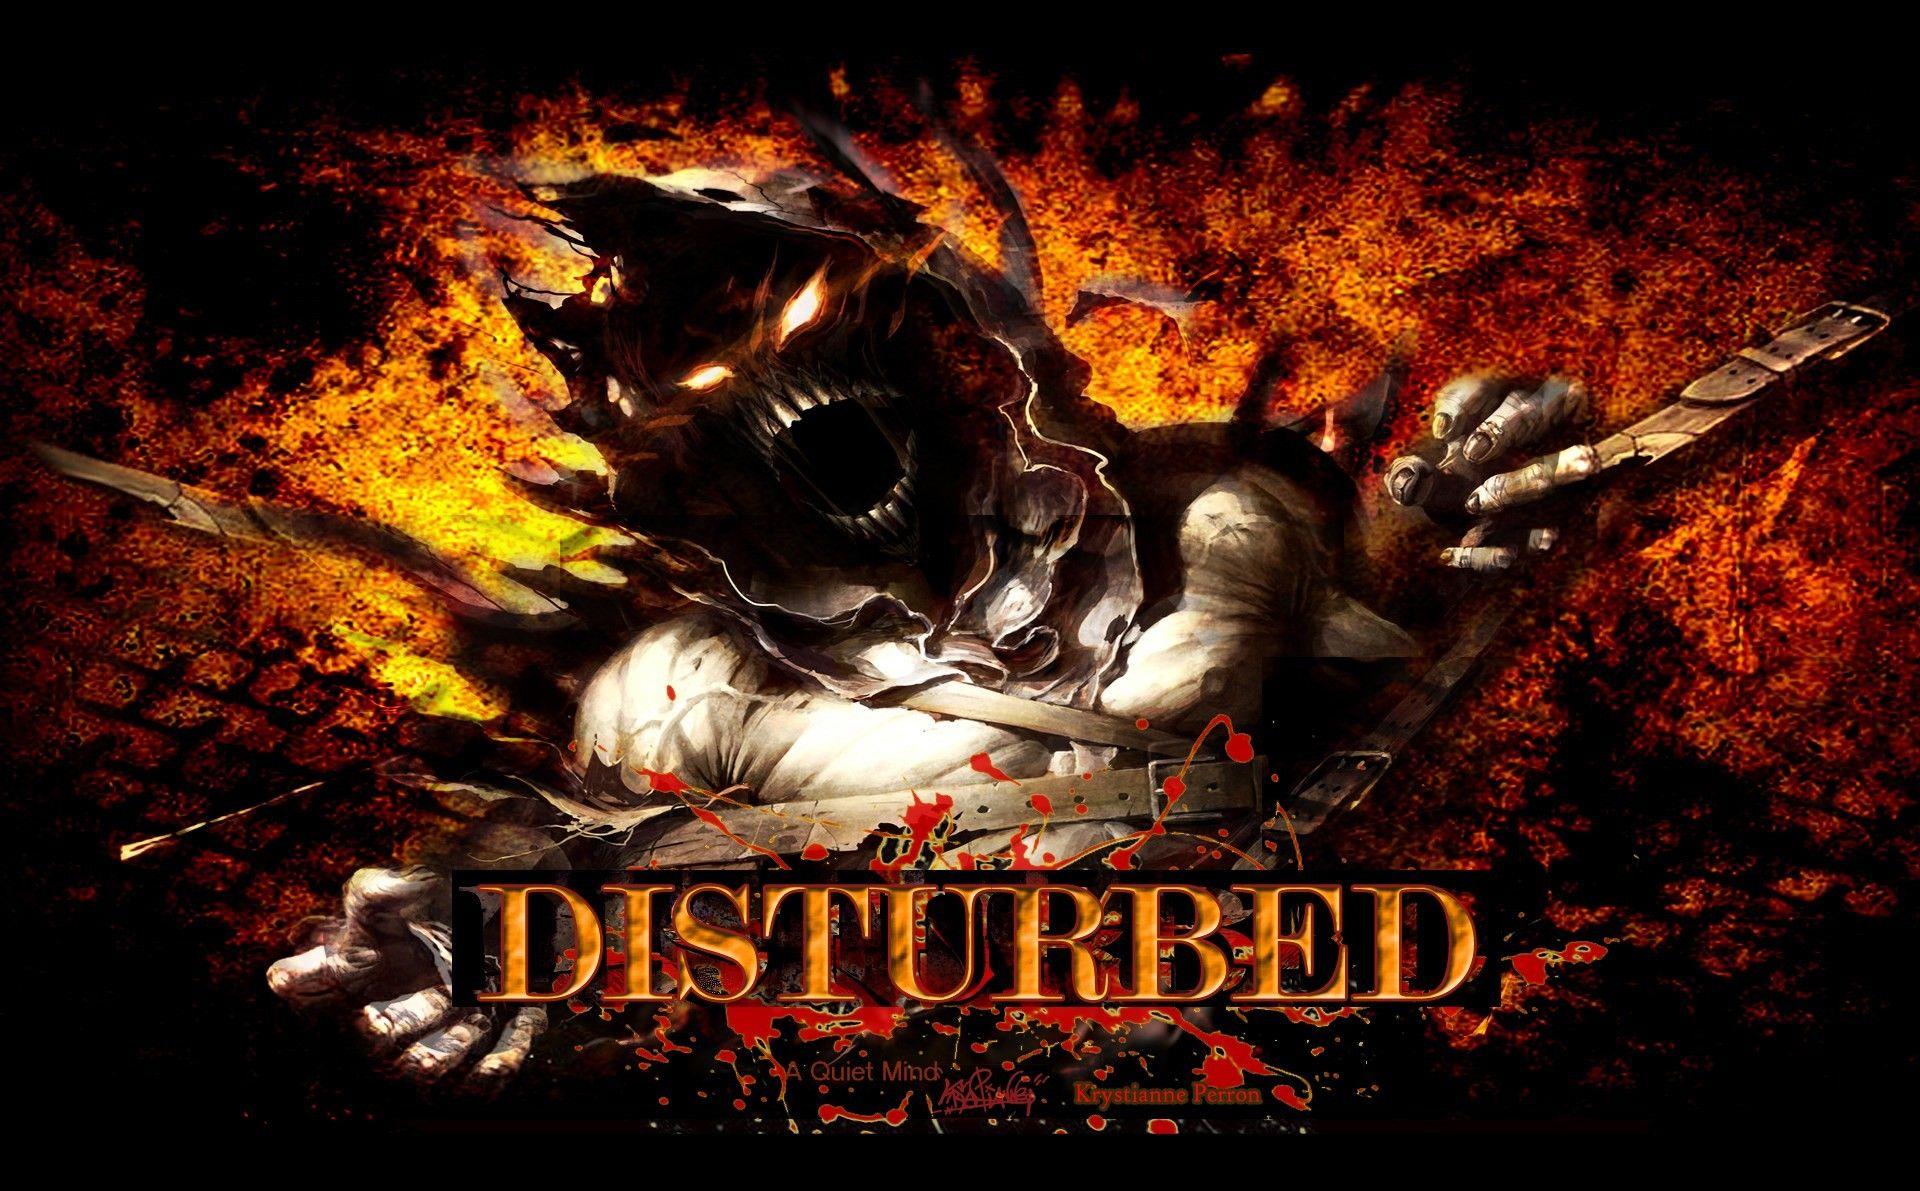 Disturbed Logo - Disturbed Logo Wallpapers For Android ~ Festival Wallpaper